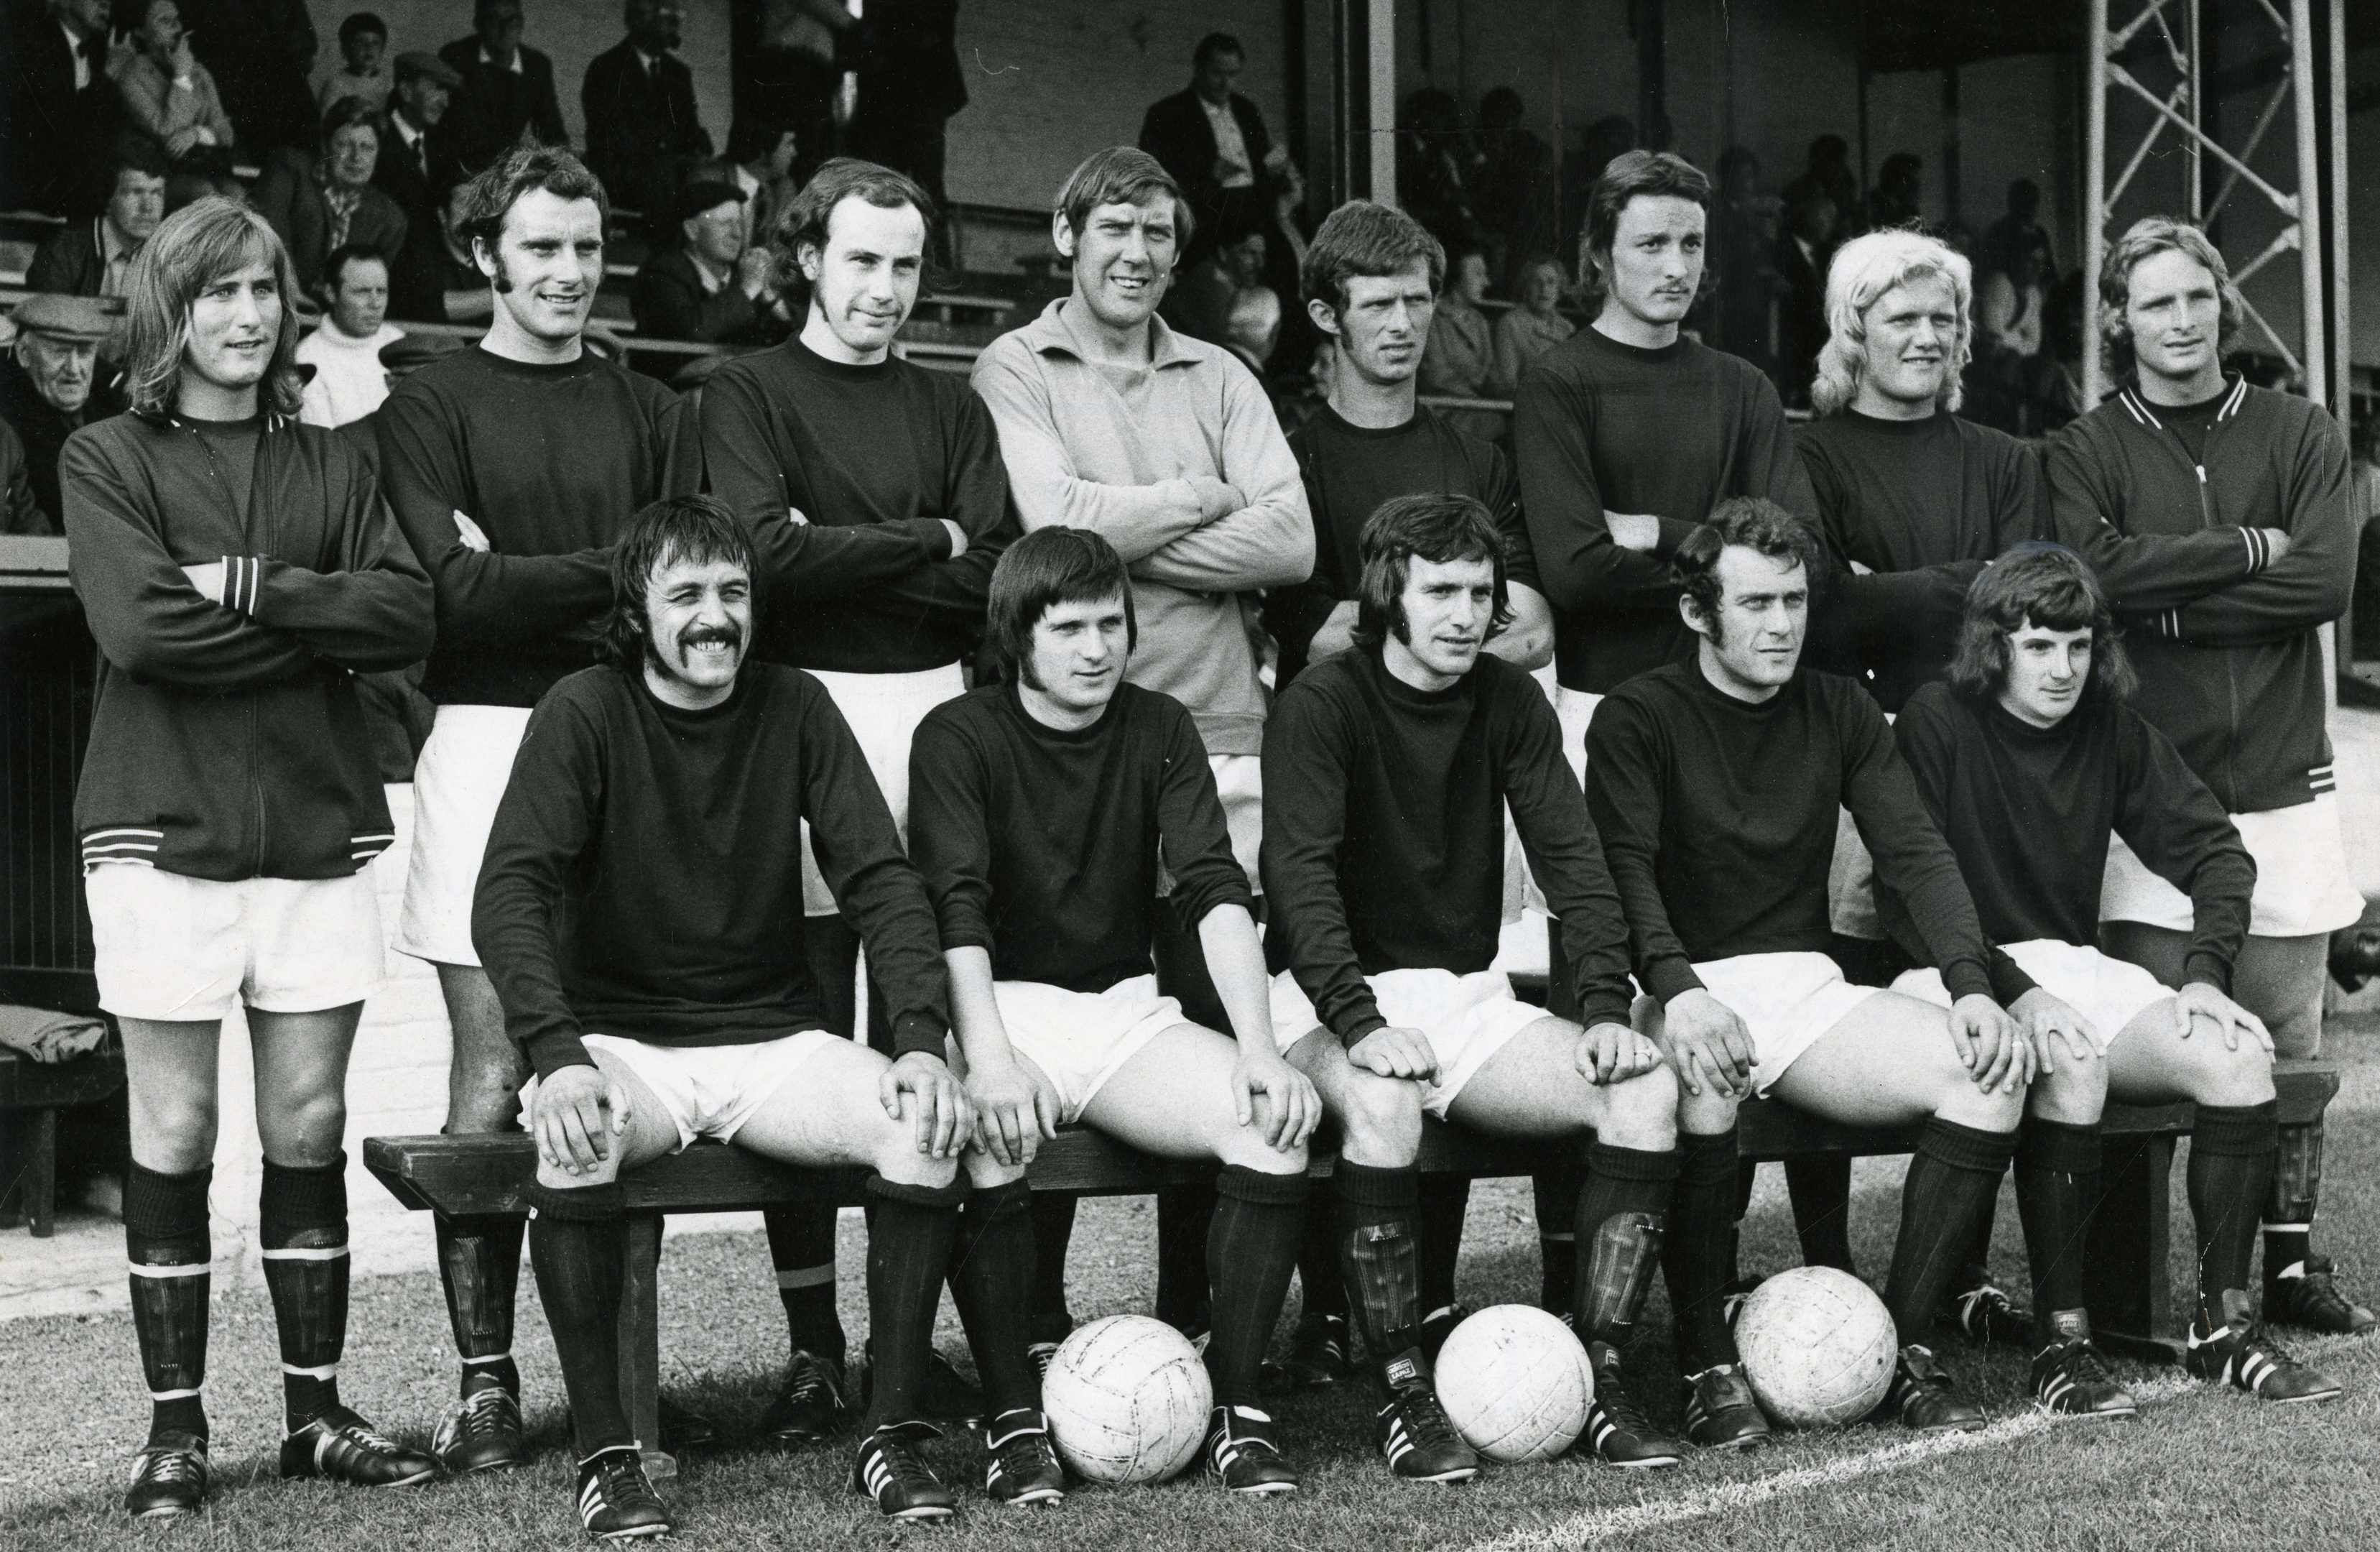 Jimmy Cant and John Fletcher pictured in the legendary 1973 team line up.  From left Reid, Milne, Rylance, Marshall, Murray, Carson, Fletcher, Donald; front, Sellars, Cant, Pirie, Penman and Yule.